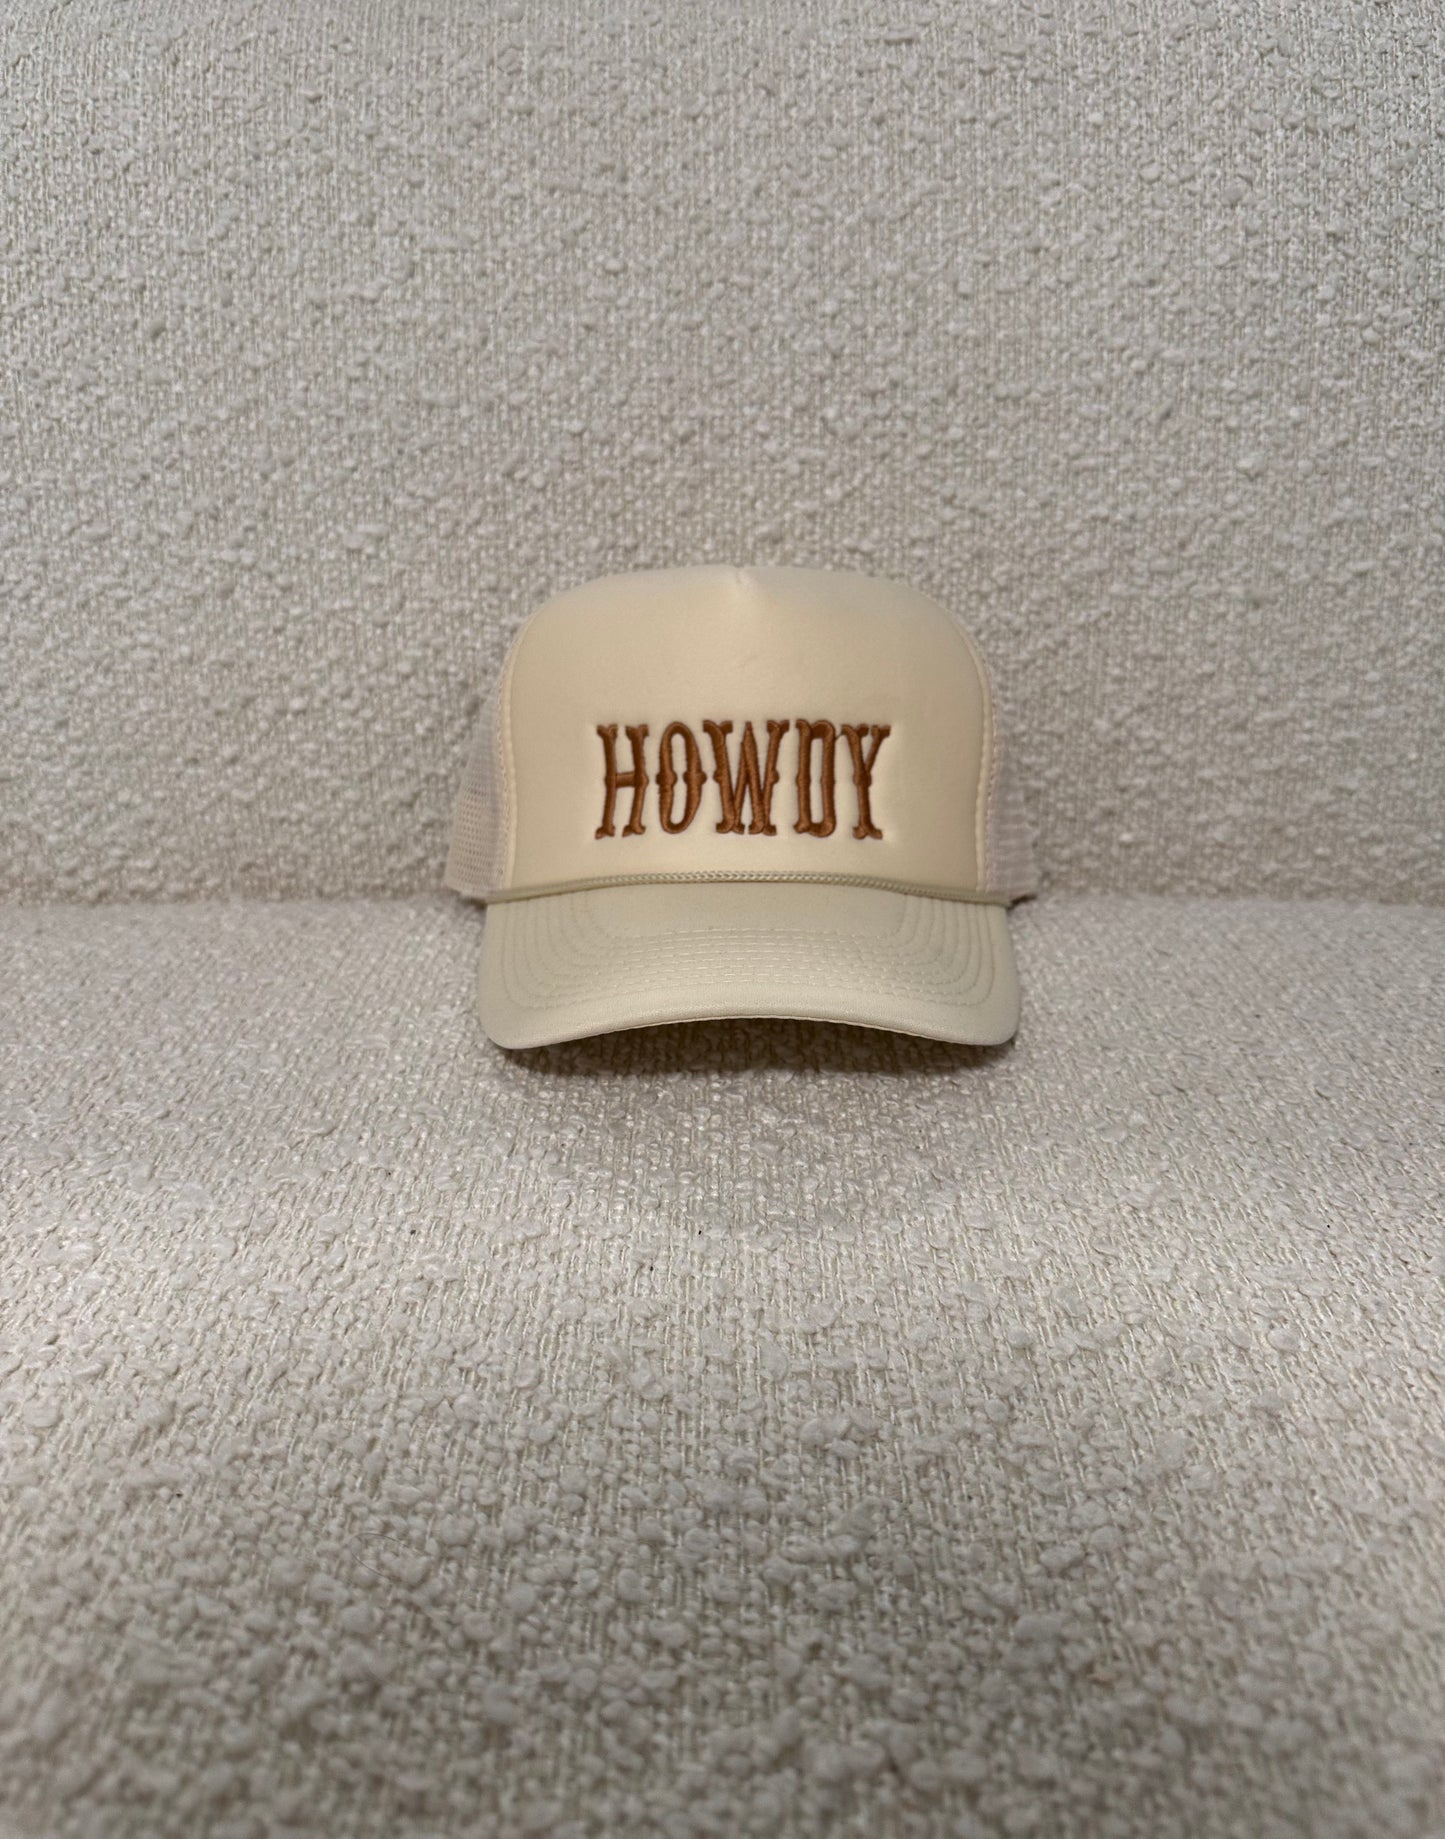 Howdy Embroidered Tan Trucker Hat